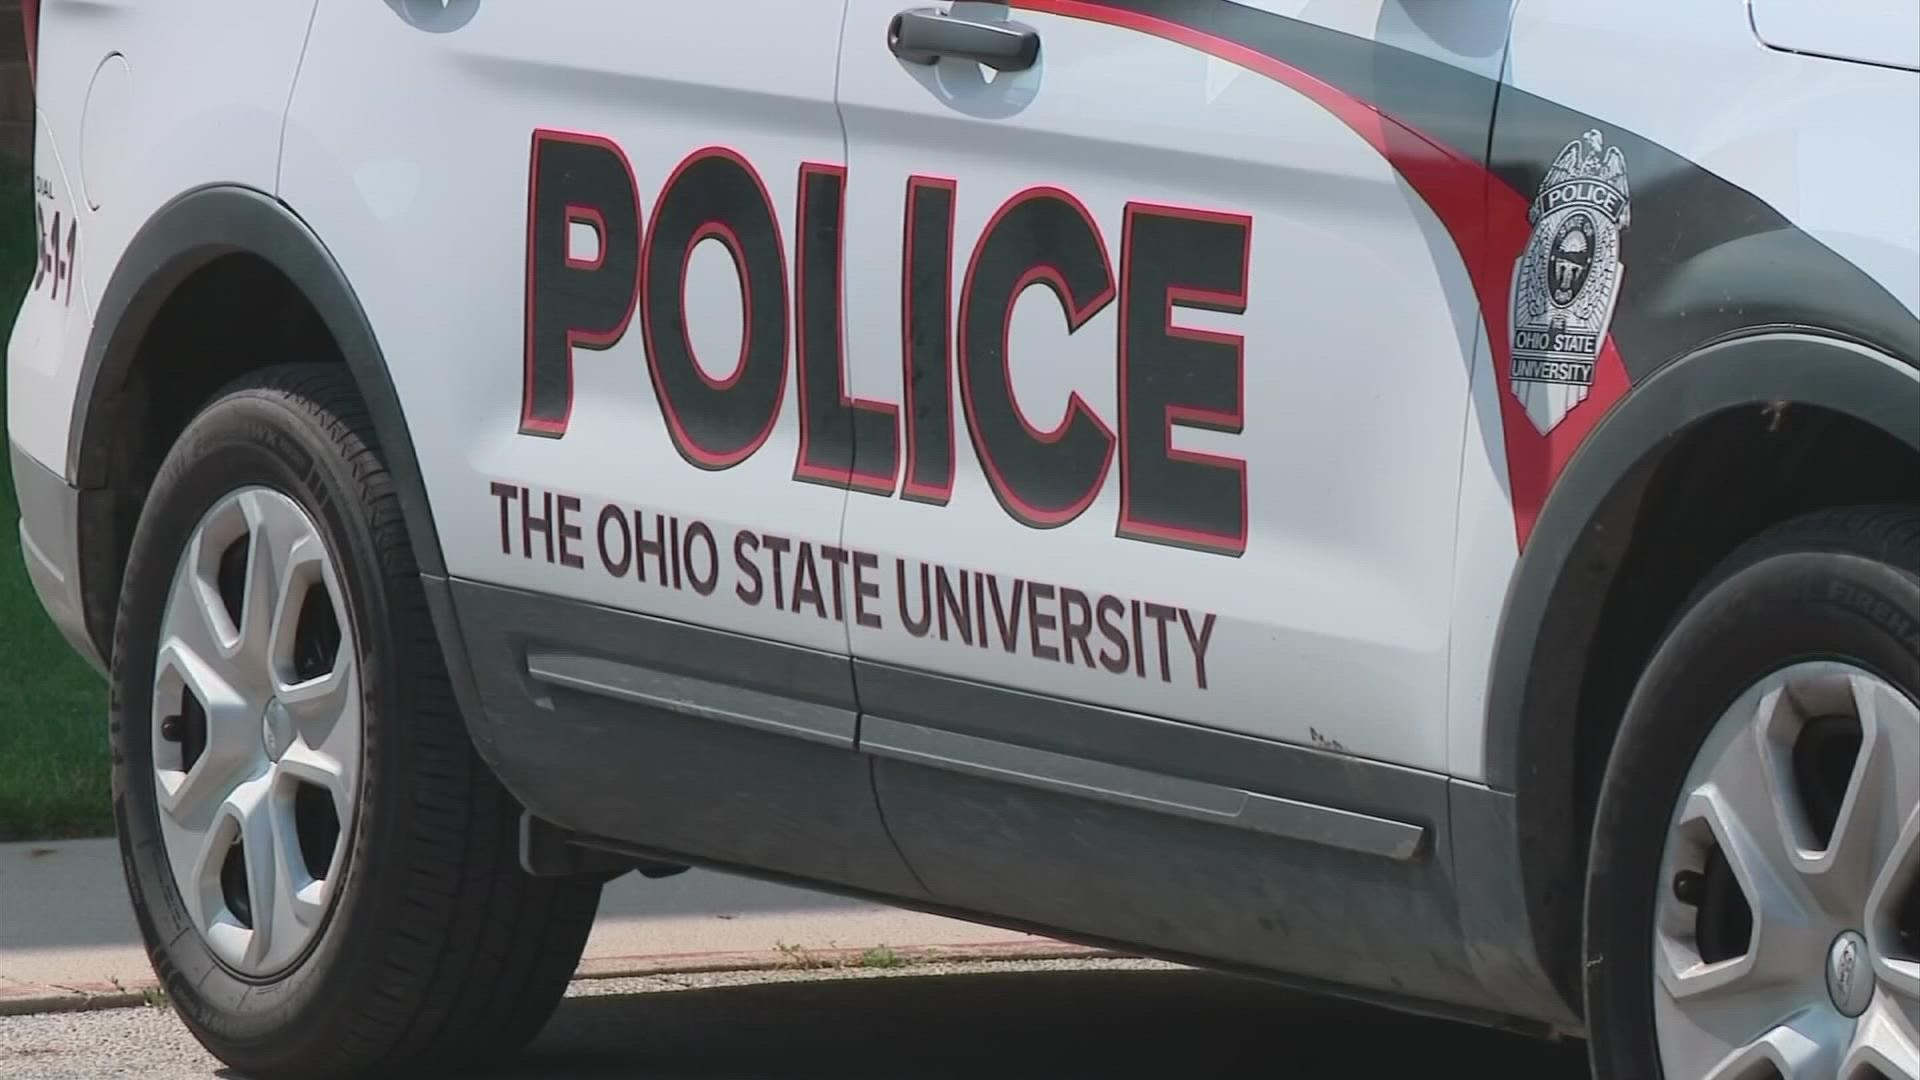 According to Columbus police, crimes like aggravated assaults and robberies are up 51% compared to 2019.